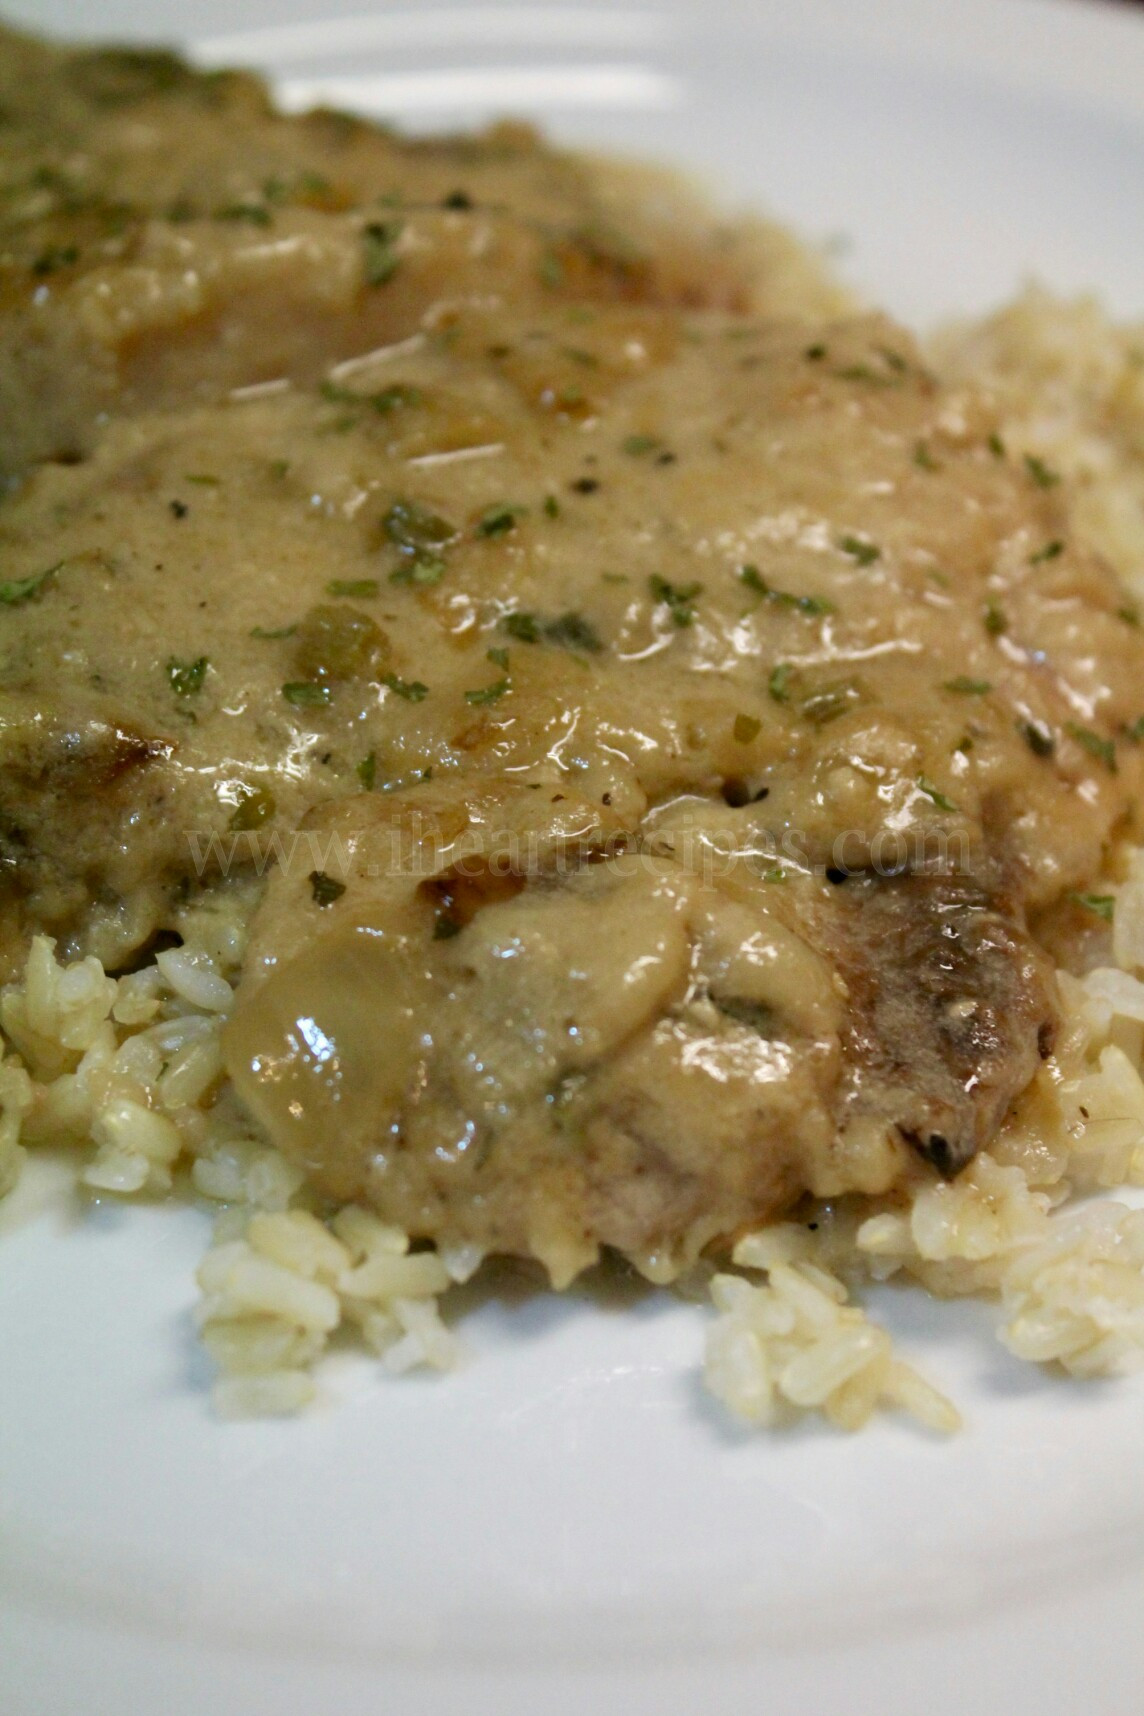 smothered pork chops with mushroom soup